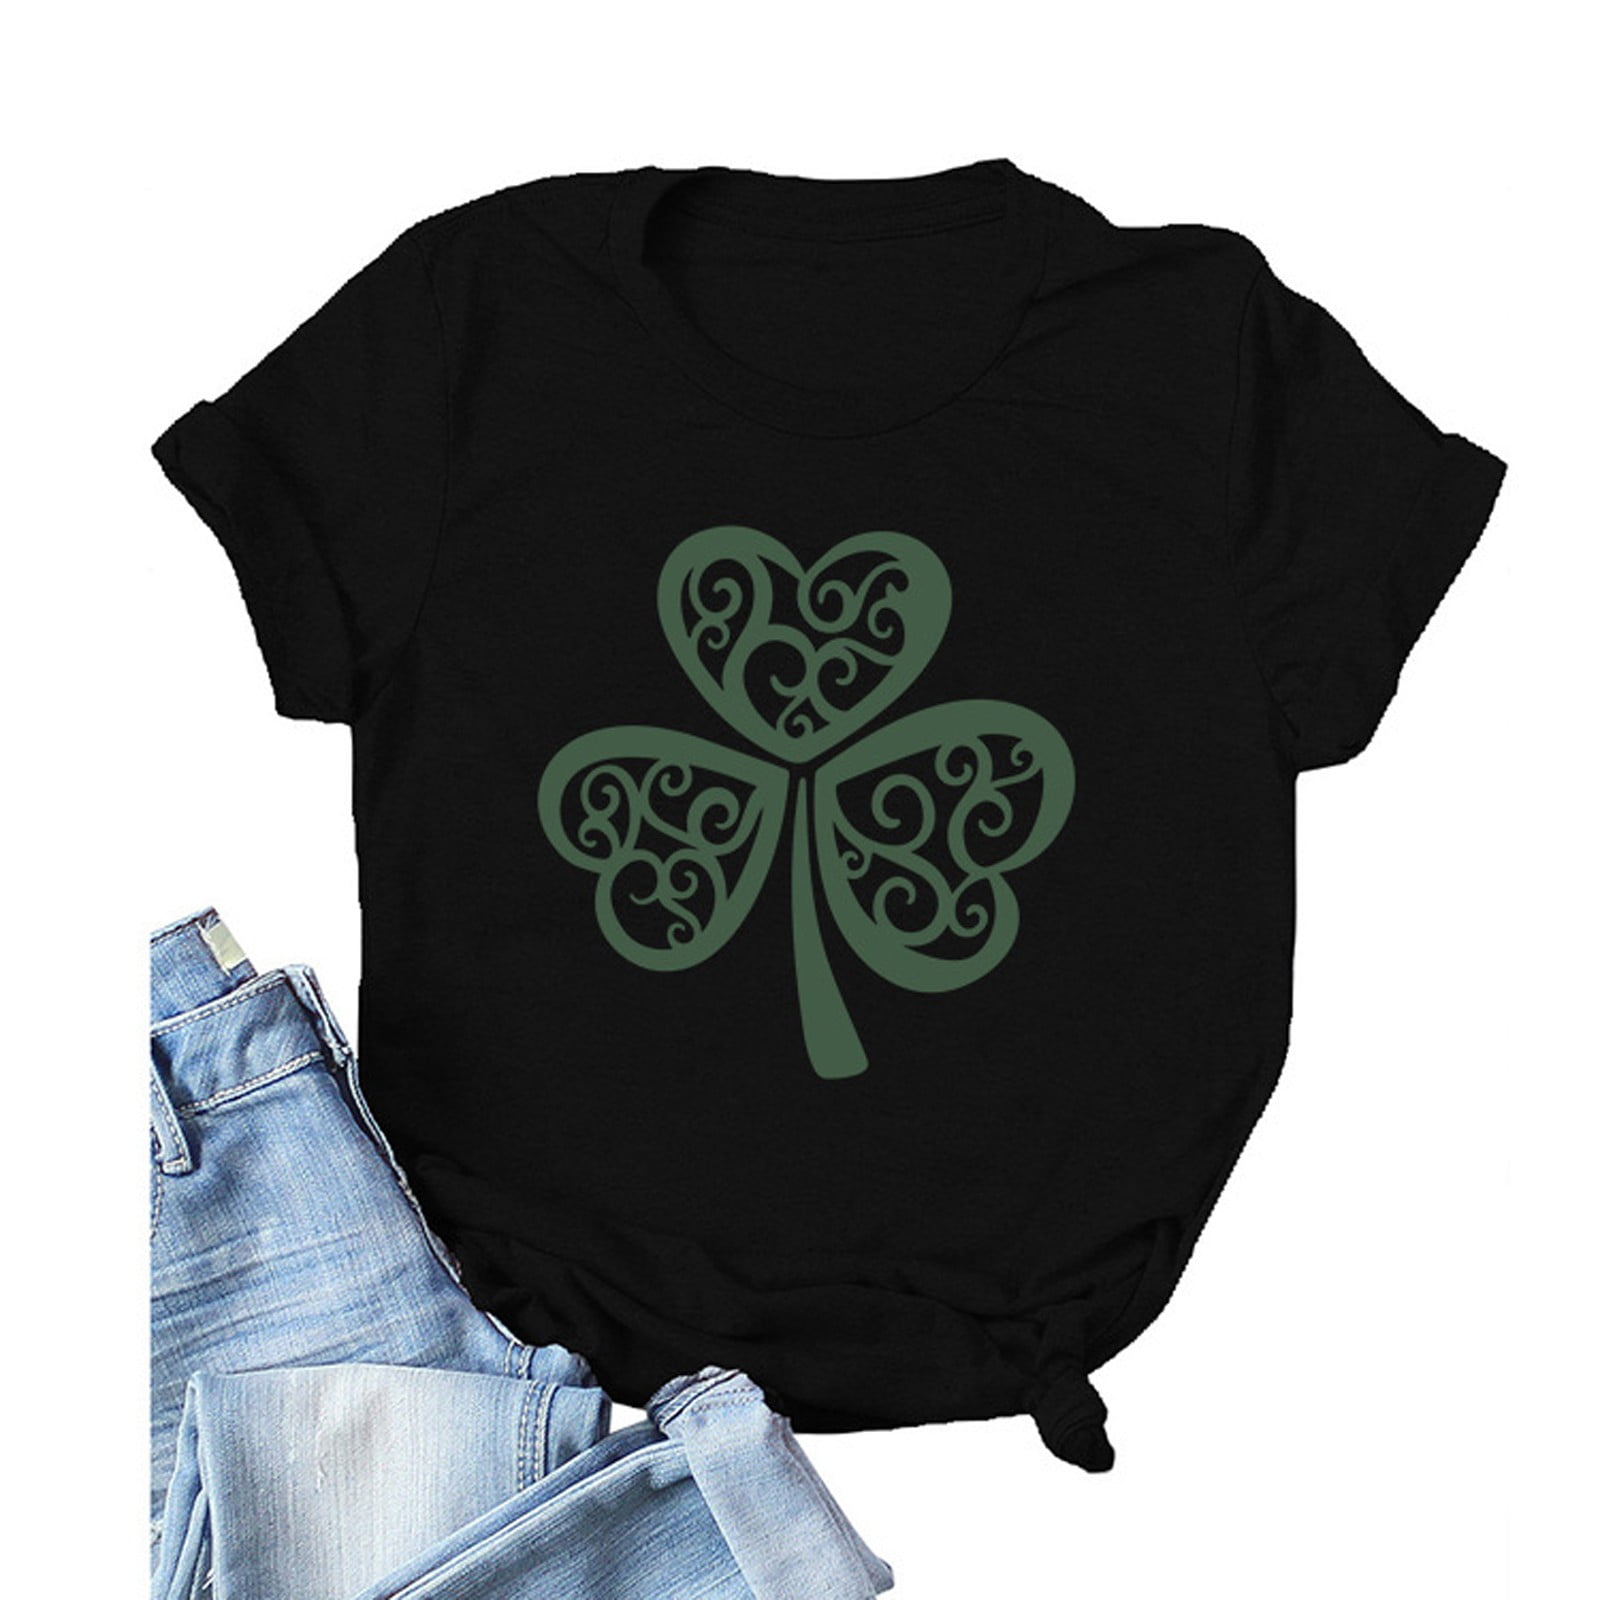 Babysbule Clearance Shirts for Women St. Patrick's Day Novelty Graphic ...